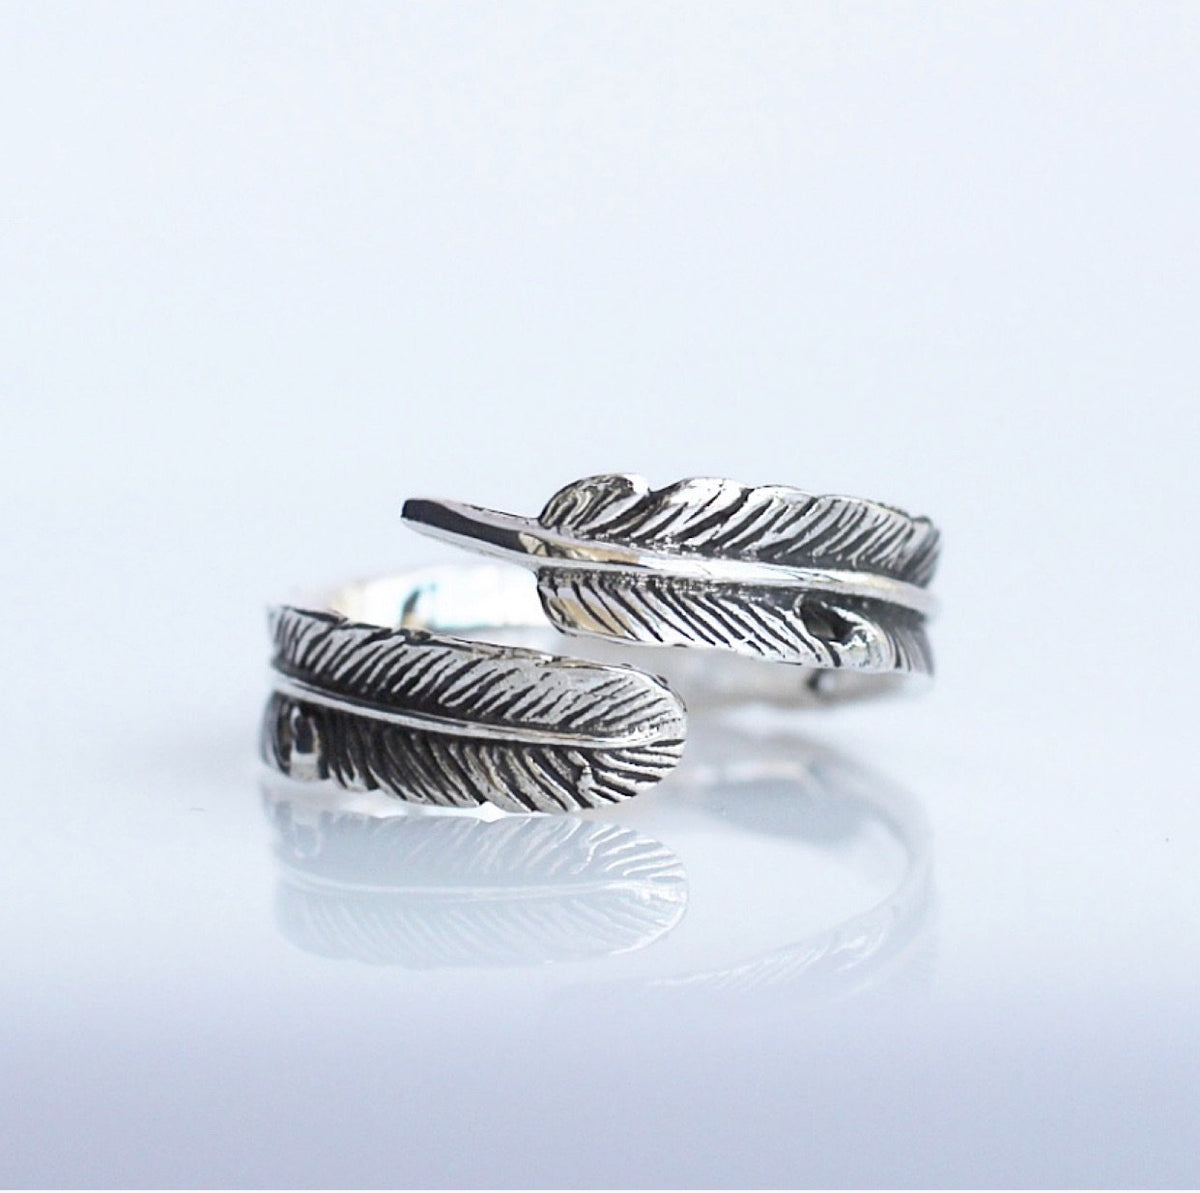 Boho Chic Ring, Adjustable feather ring, Sterling silver feather ring, gift ideas, gifts for her, popular jewelry, adjustable ring by KesleyBoutique.com, Girlwith3jobs.com